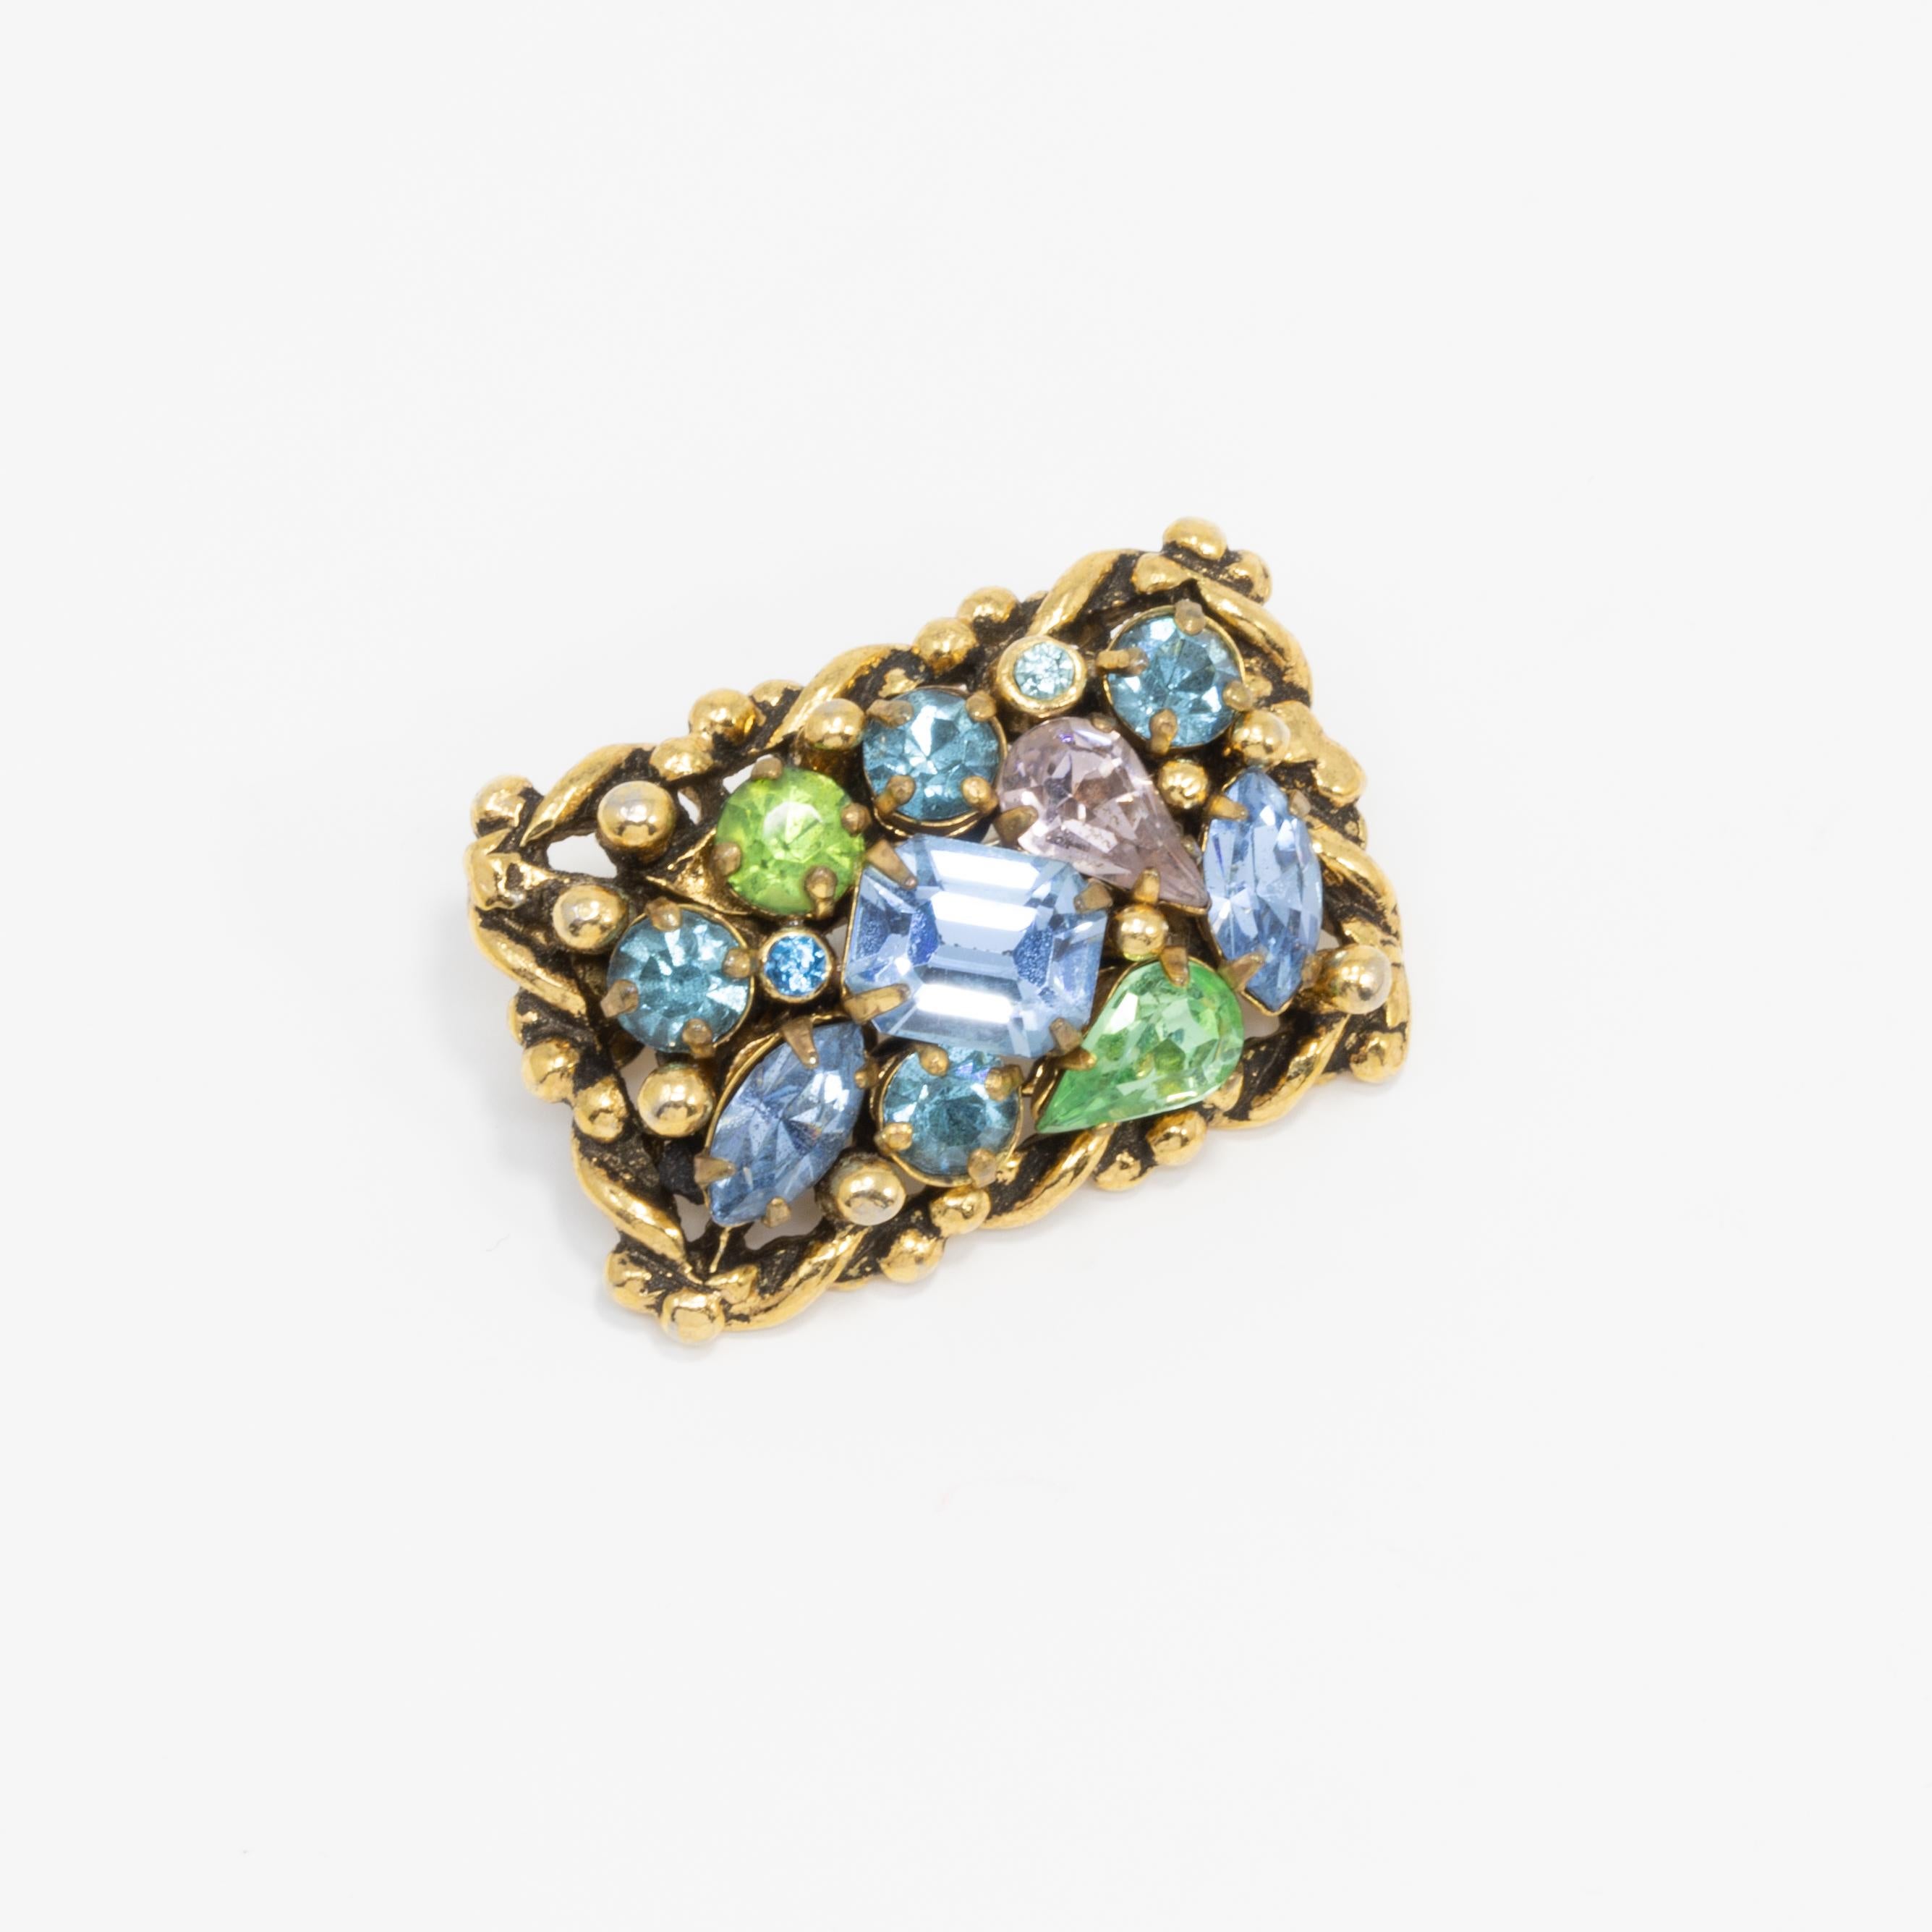 Vintage pin by 1950s costume jewelry designer Barclay, based in Rhode Island, USA. Features aquamarine blue and peridot green crystals prong-set in a decorative, gold-tone metal setting.From the Jewels of India collection.

Hallmarks: Barclay